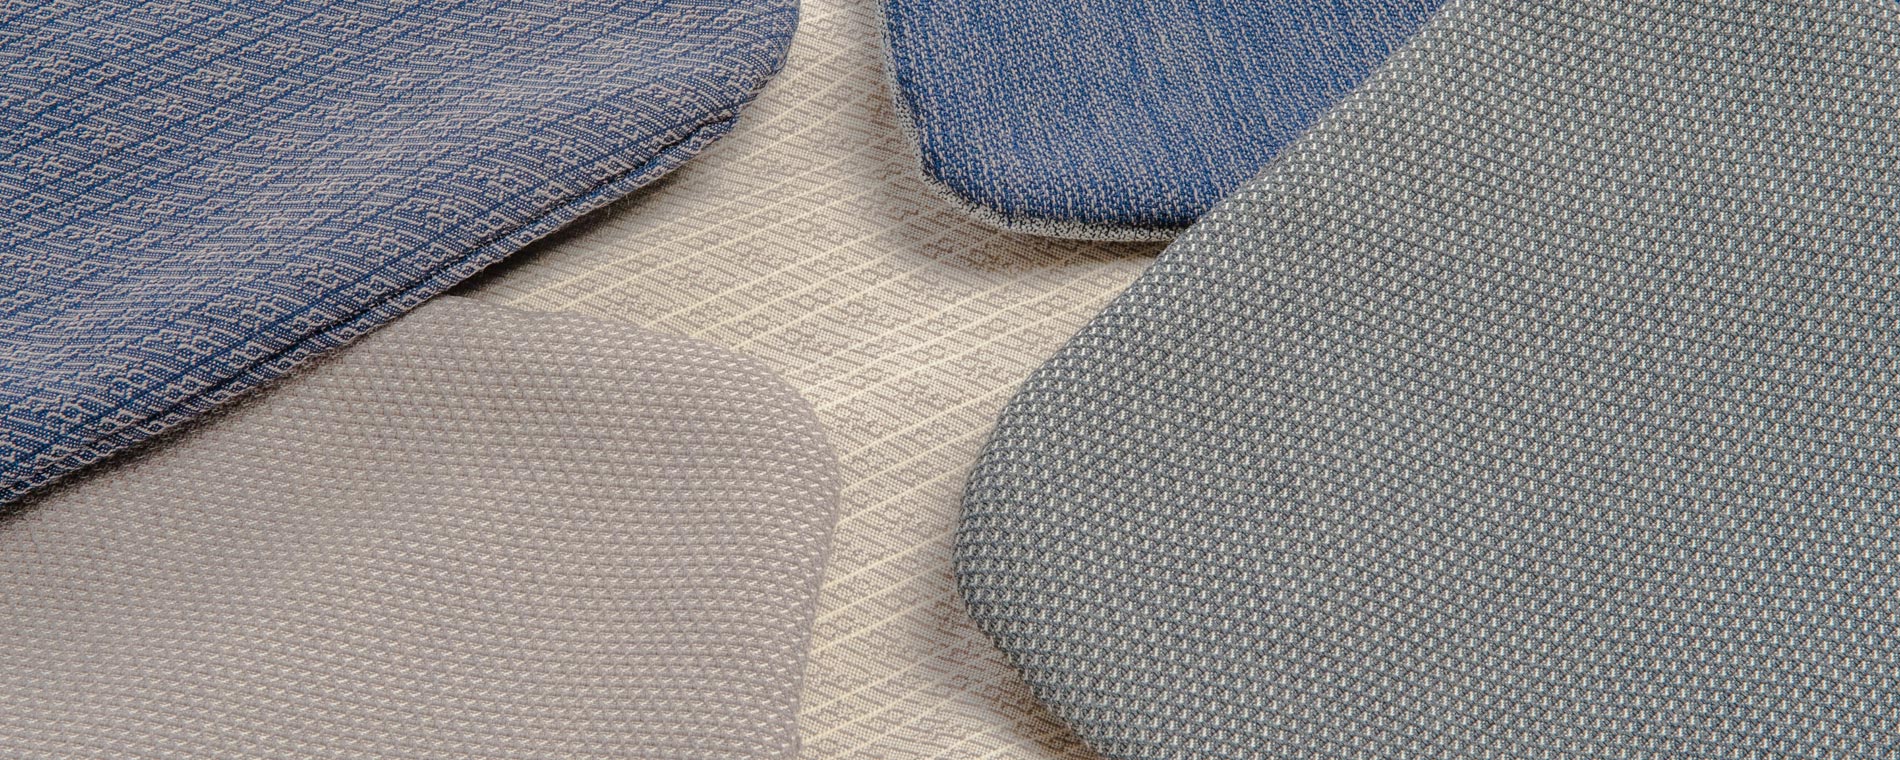 fabrics for seats, curtains and headrests